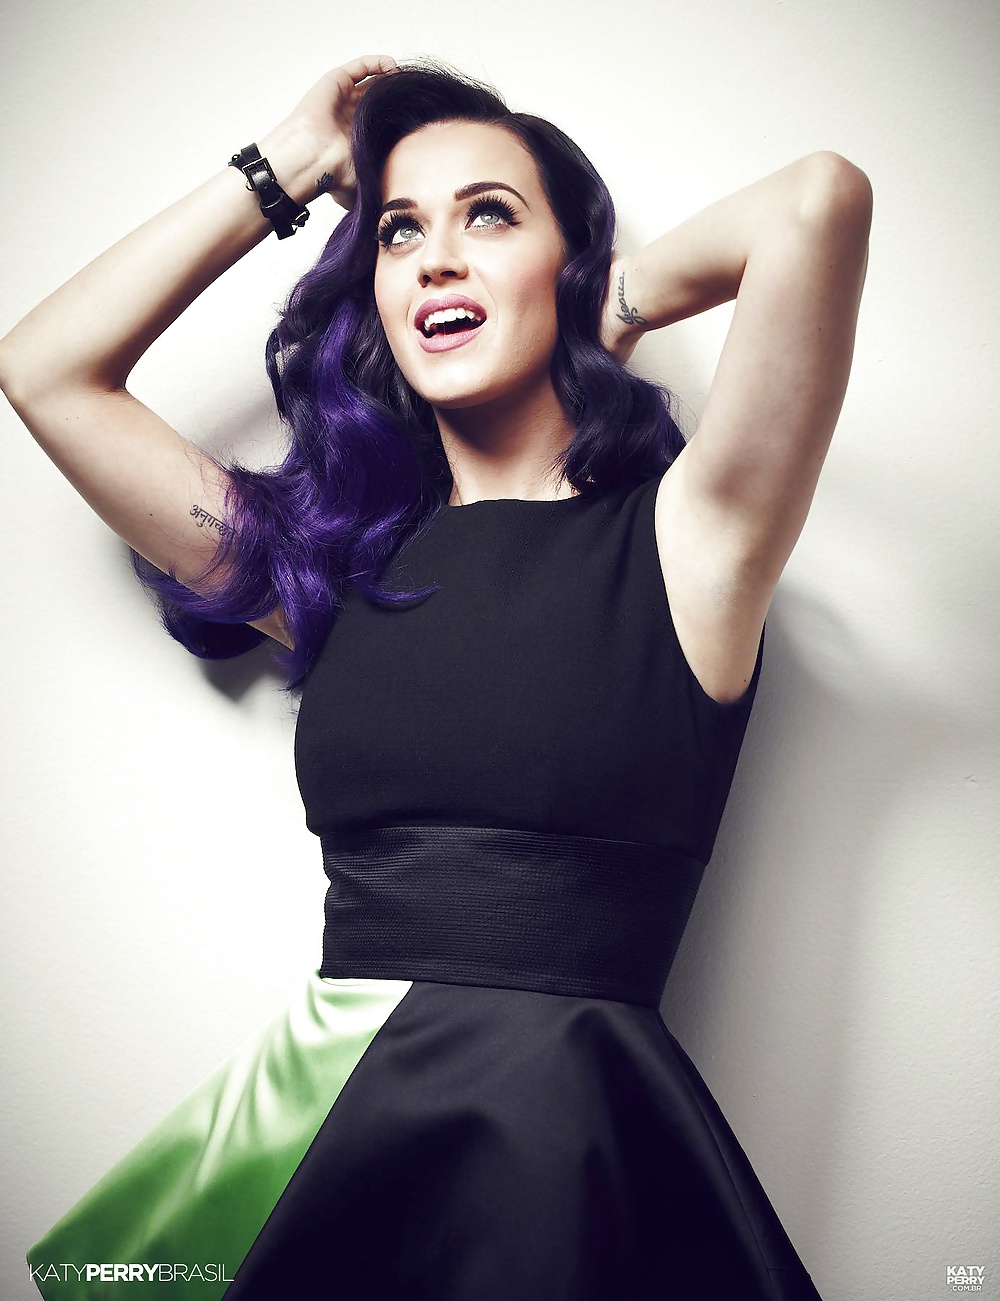 Katy Perry Achsel Stoppel #30976751